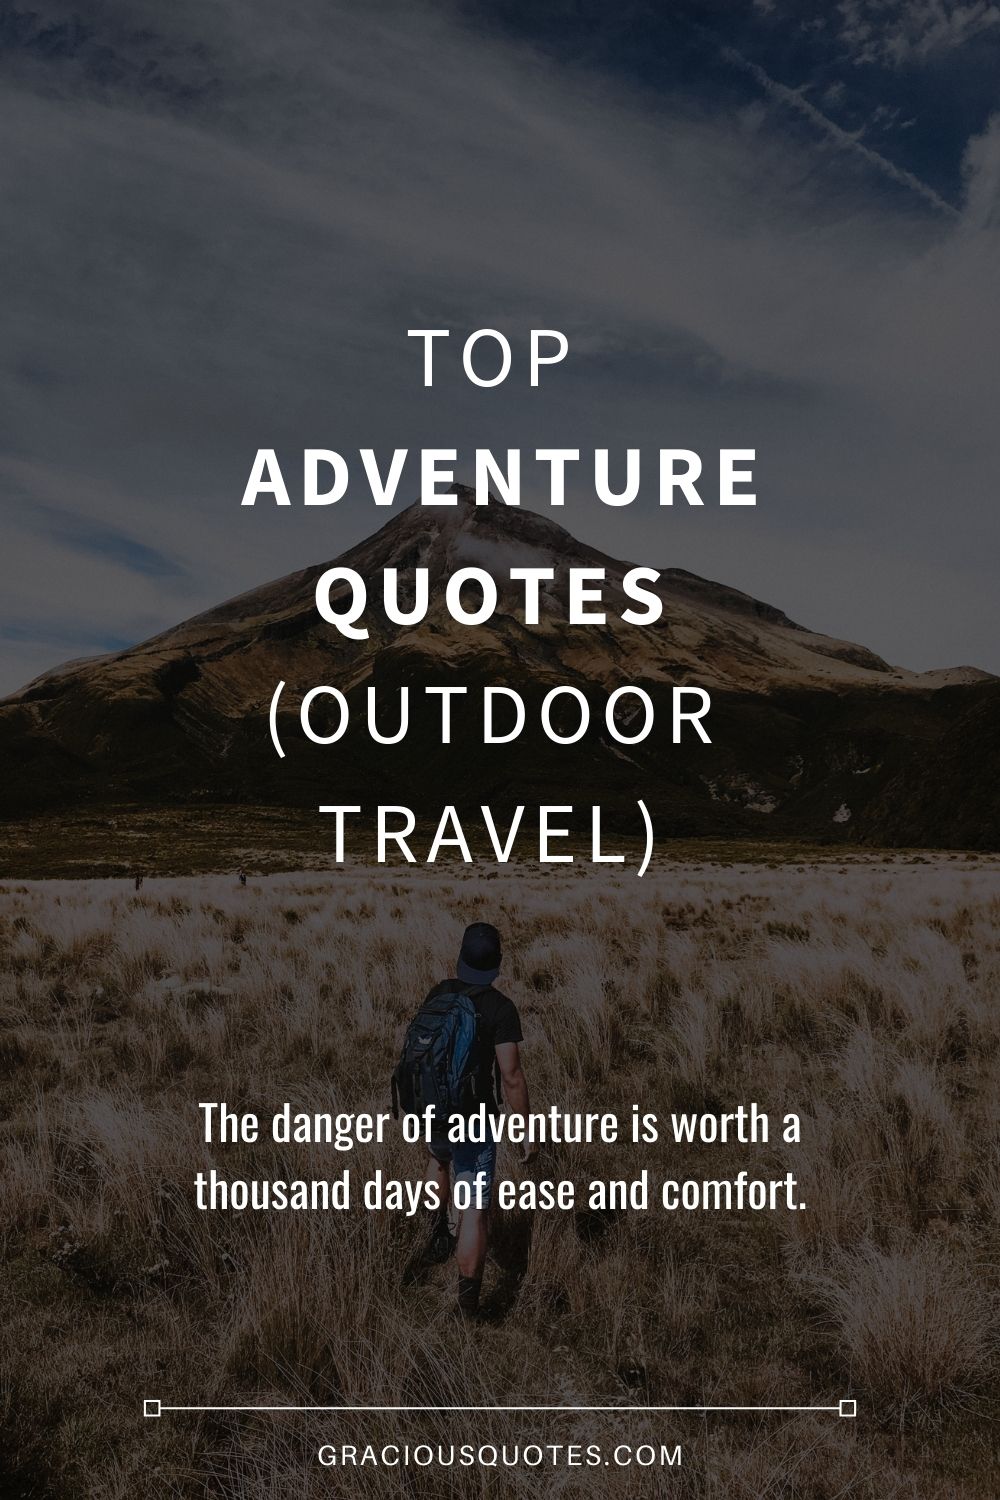 Top Adventure Quotes (OUTDOOR TRAVEL) - Gracious Quotes